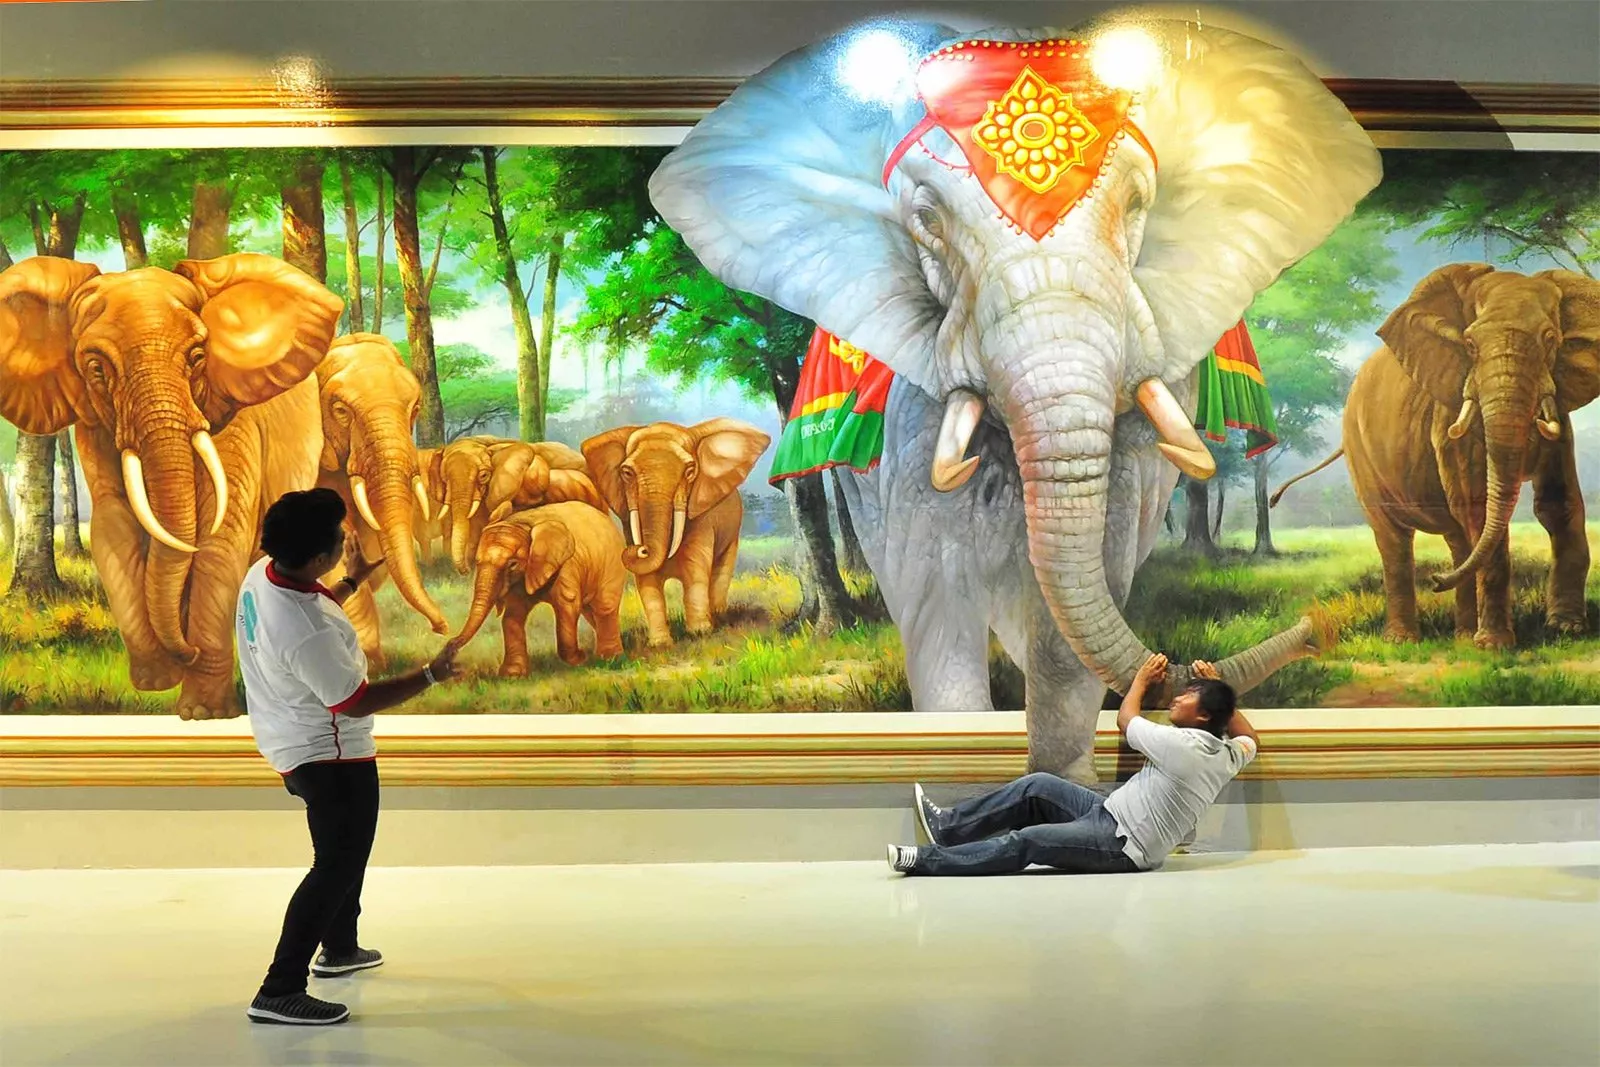 Museum of Art in 3 D in Thailand, Central Asia | Art Galleries - Rated 3.8